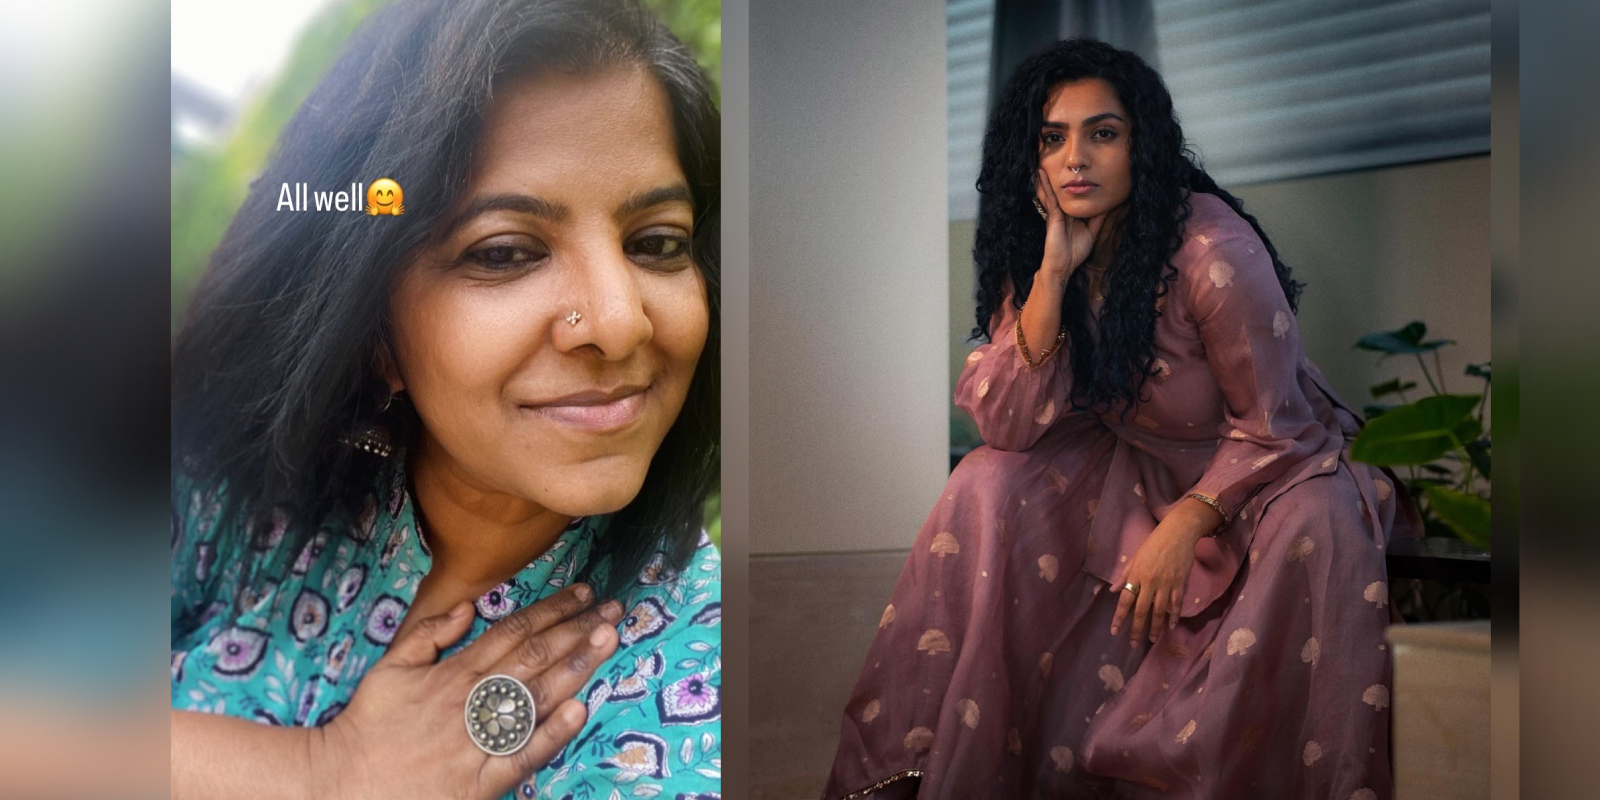 Crime thriller from Parvathy-Leena Manimekalai - The South First